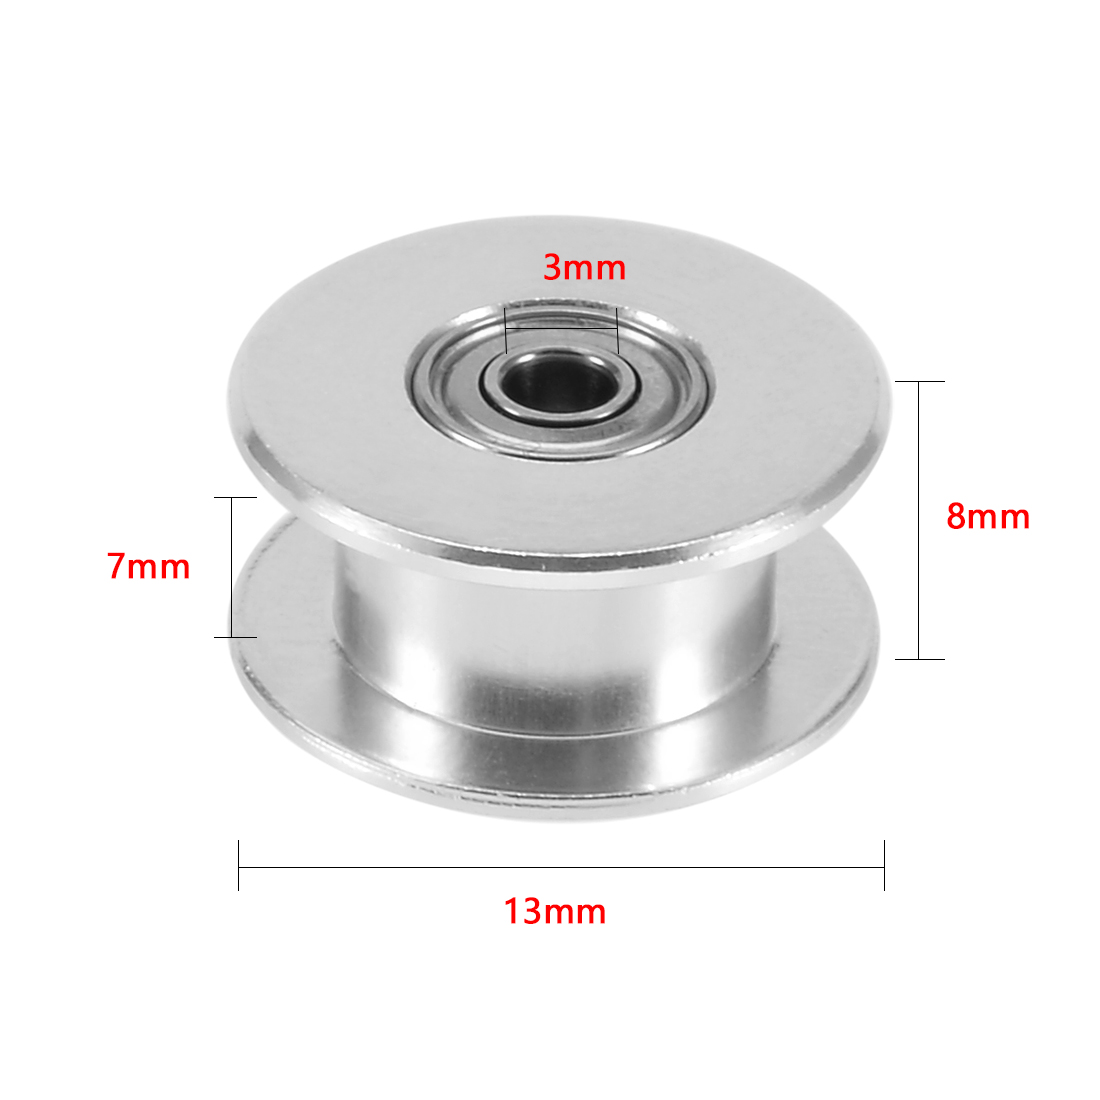 Unique Bargains Aluminum Idler Pulley with Ball Bearings GT2 3mm Bore for 3D Printer